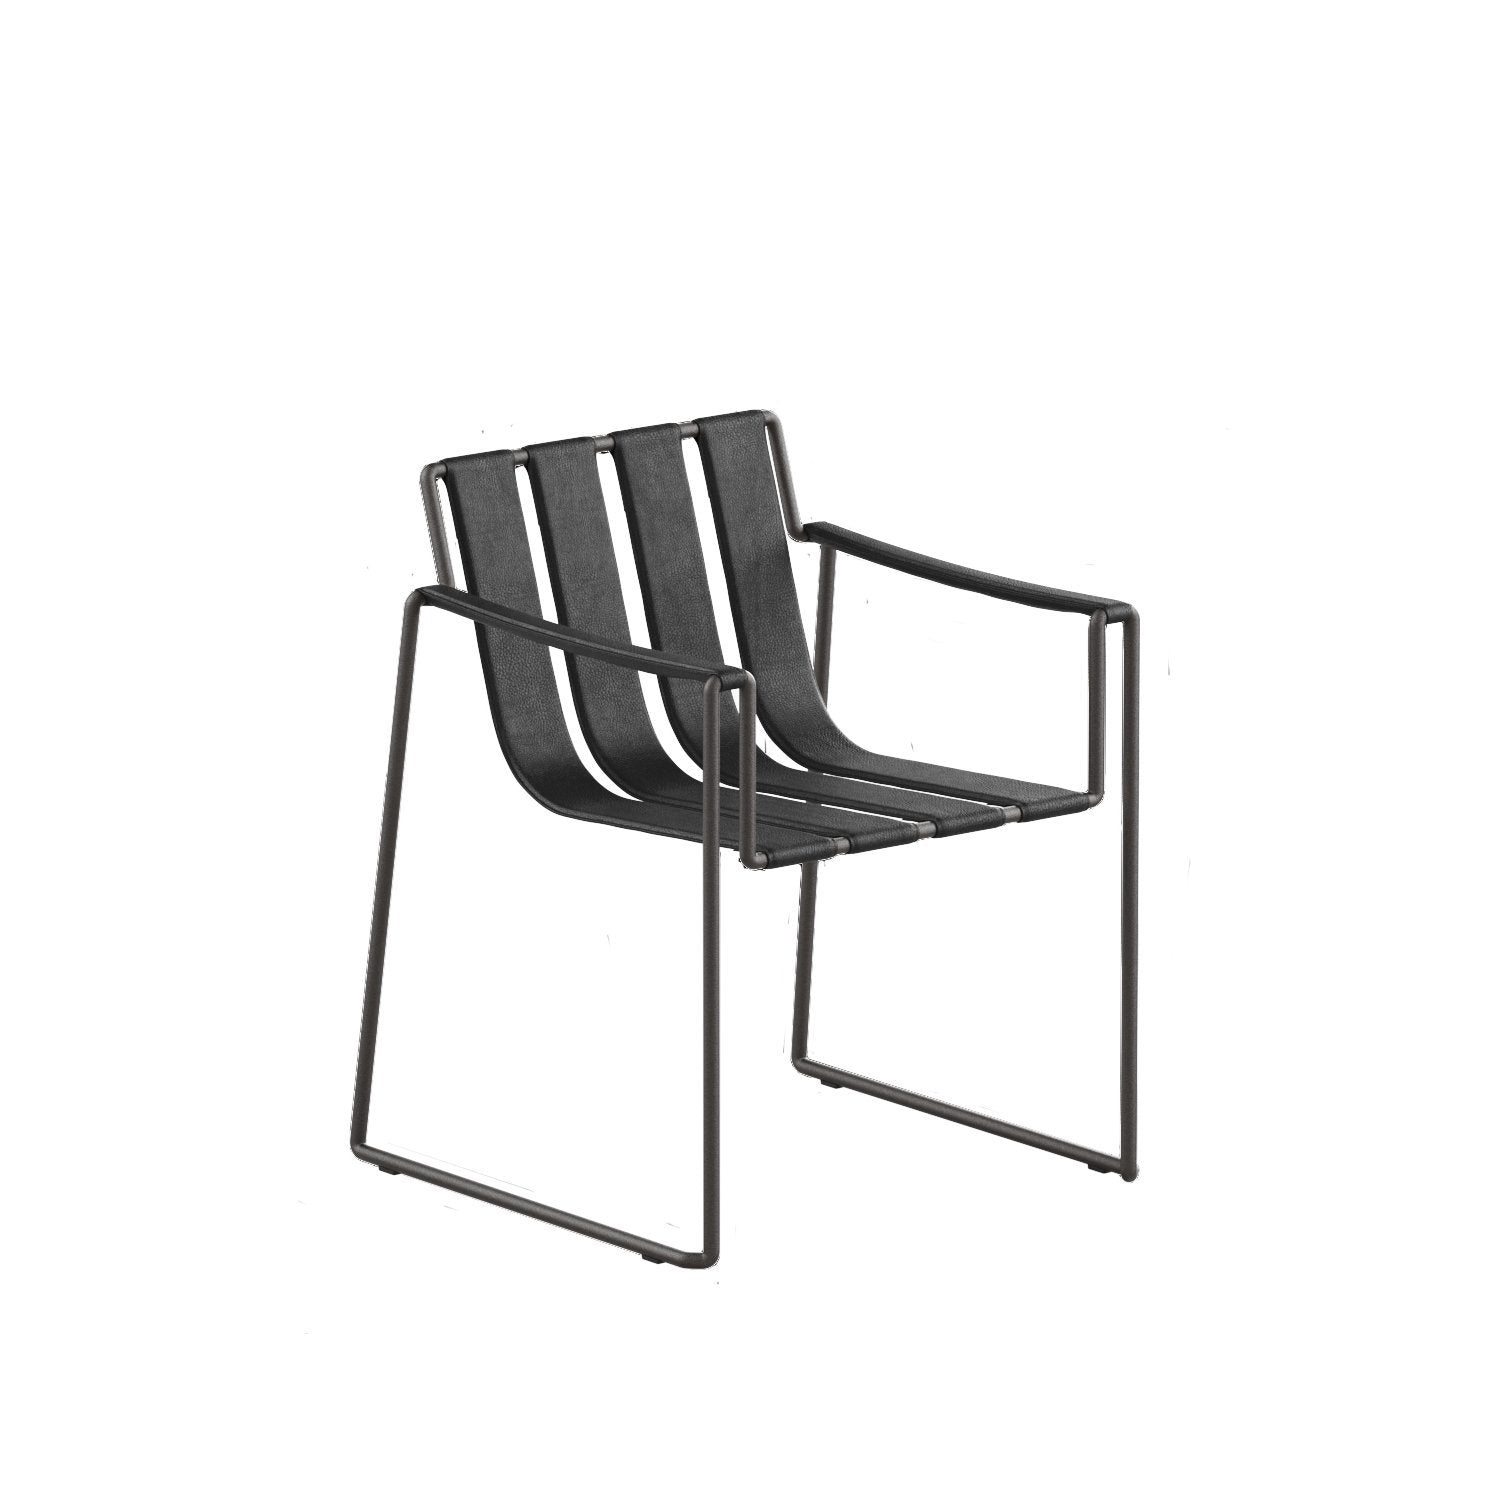 Strappy 55 chair in black